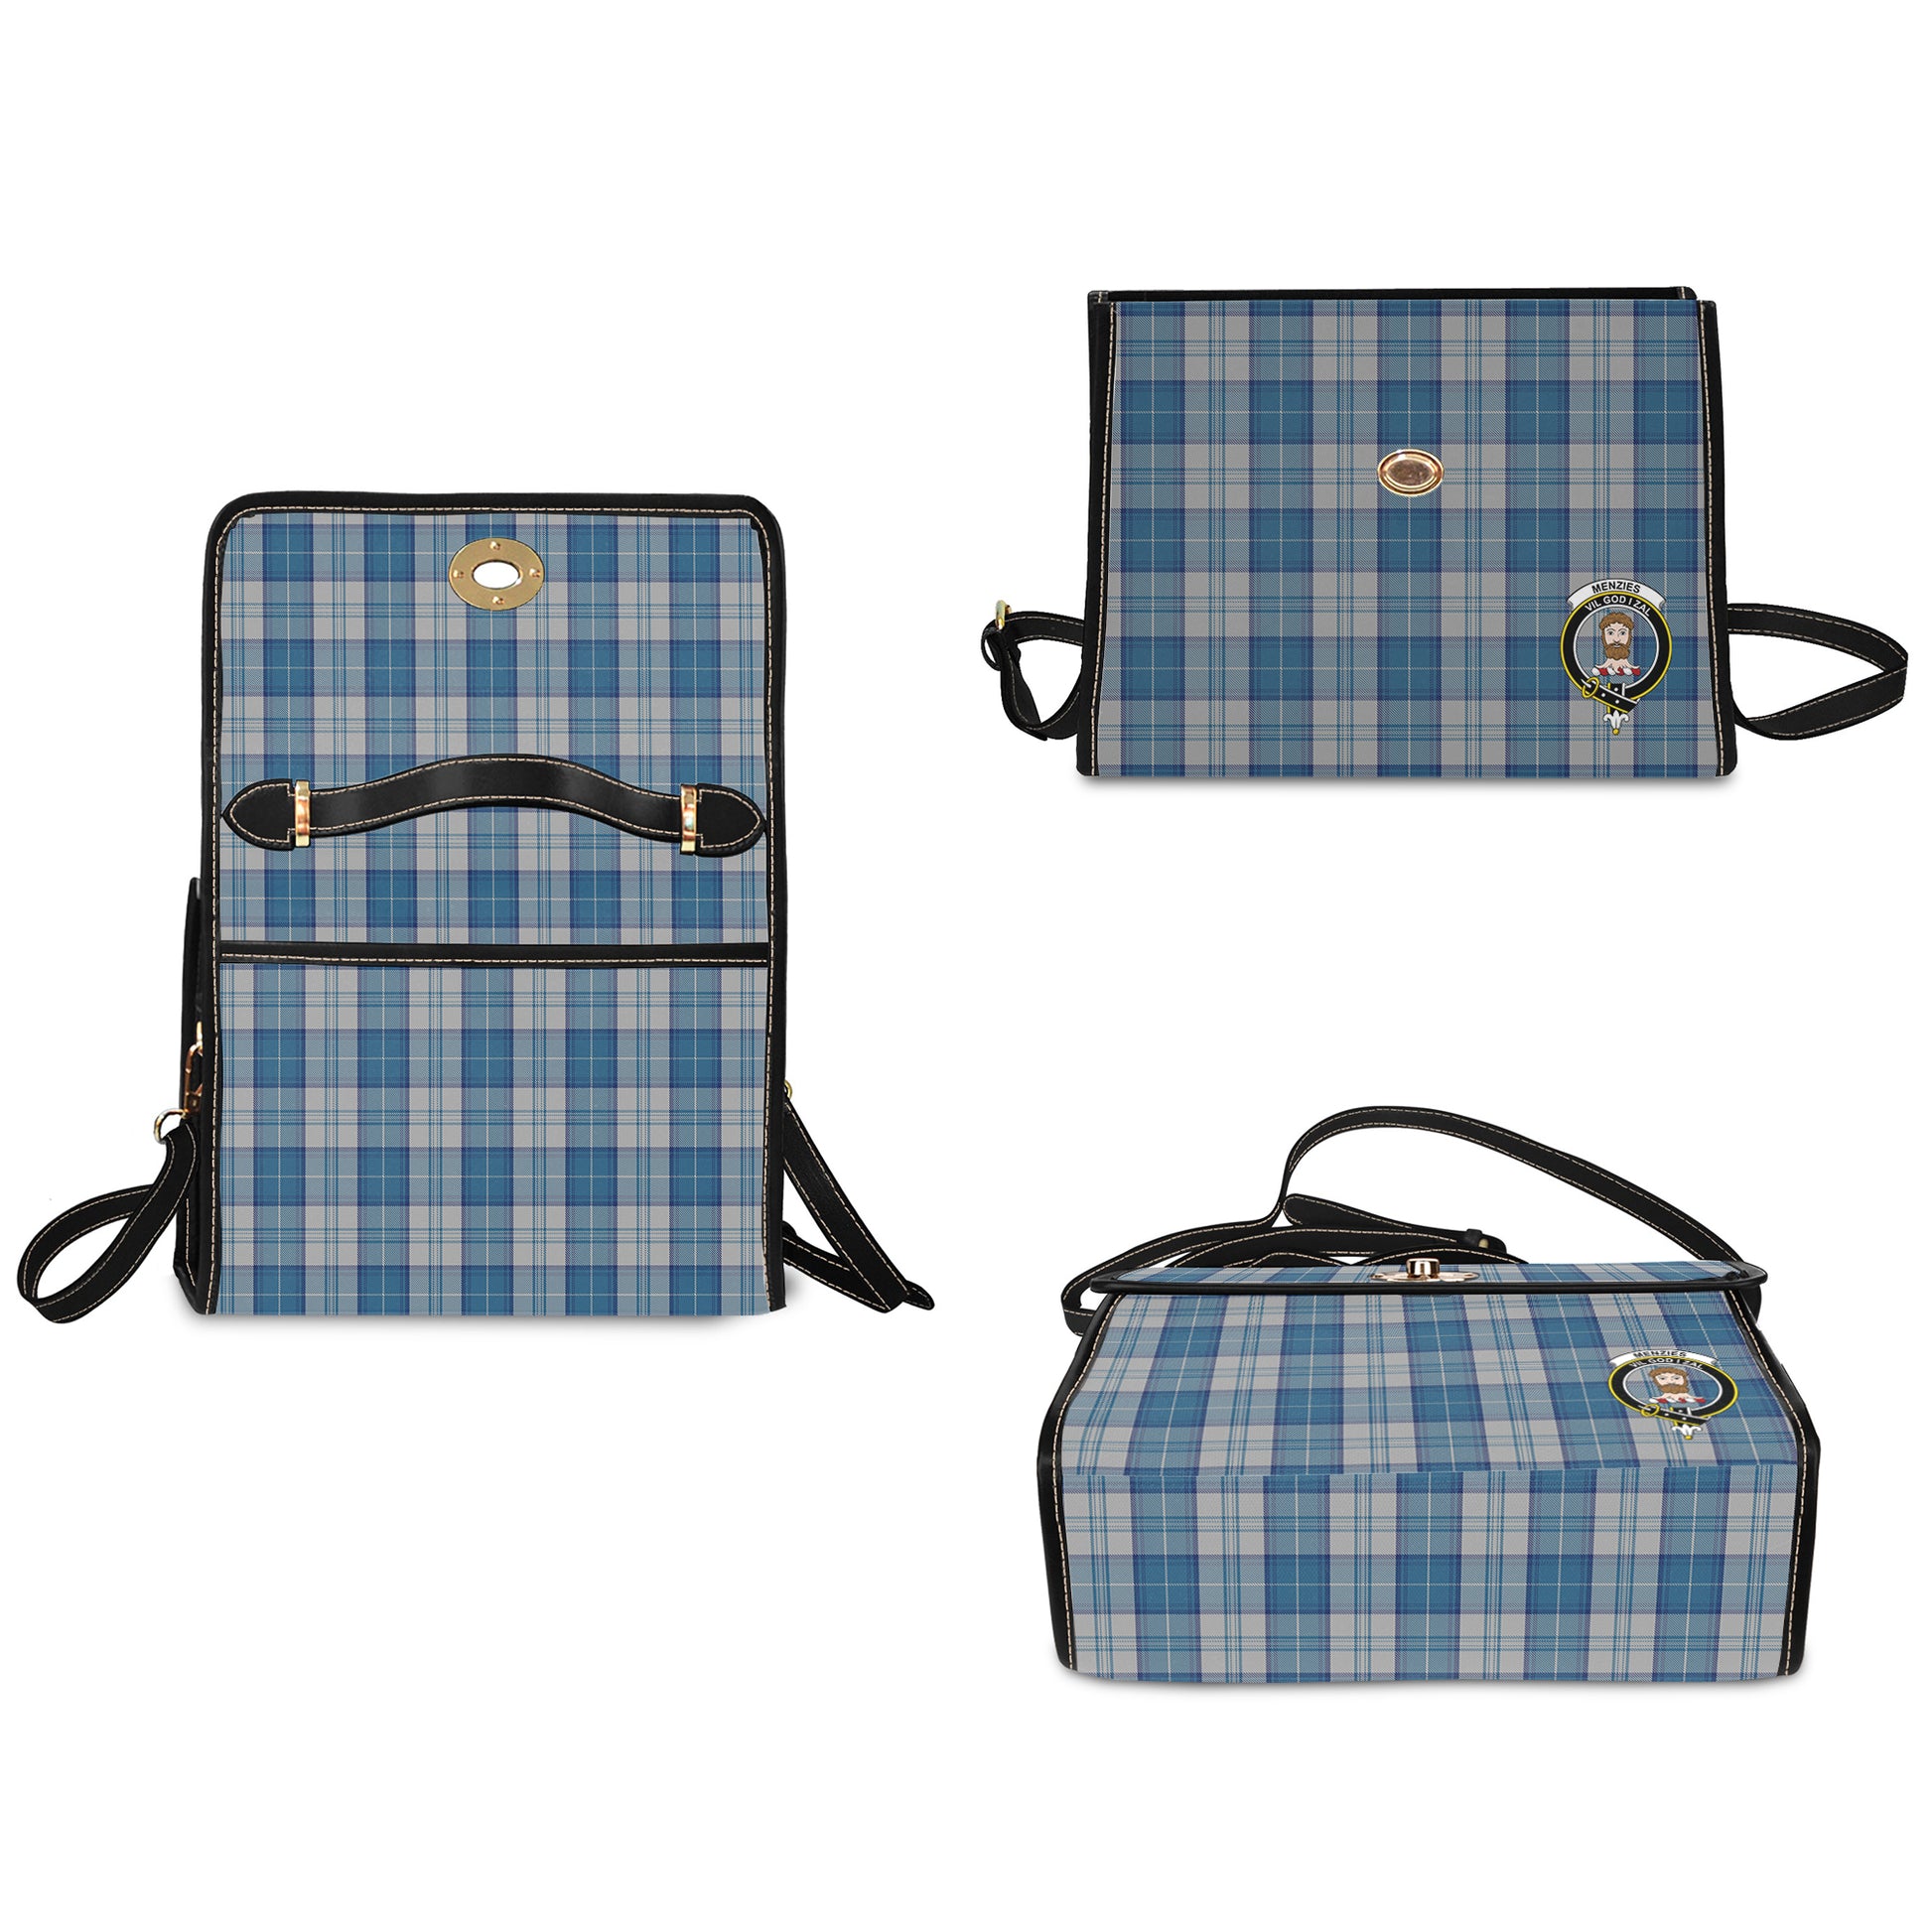 menzies-dress-blue-and-white-tartan-leather-strap-waterproof-canvas-bag-with-family-crest